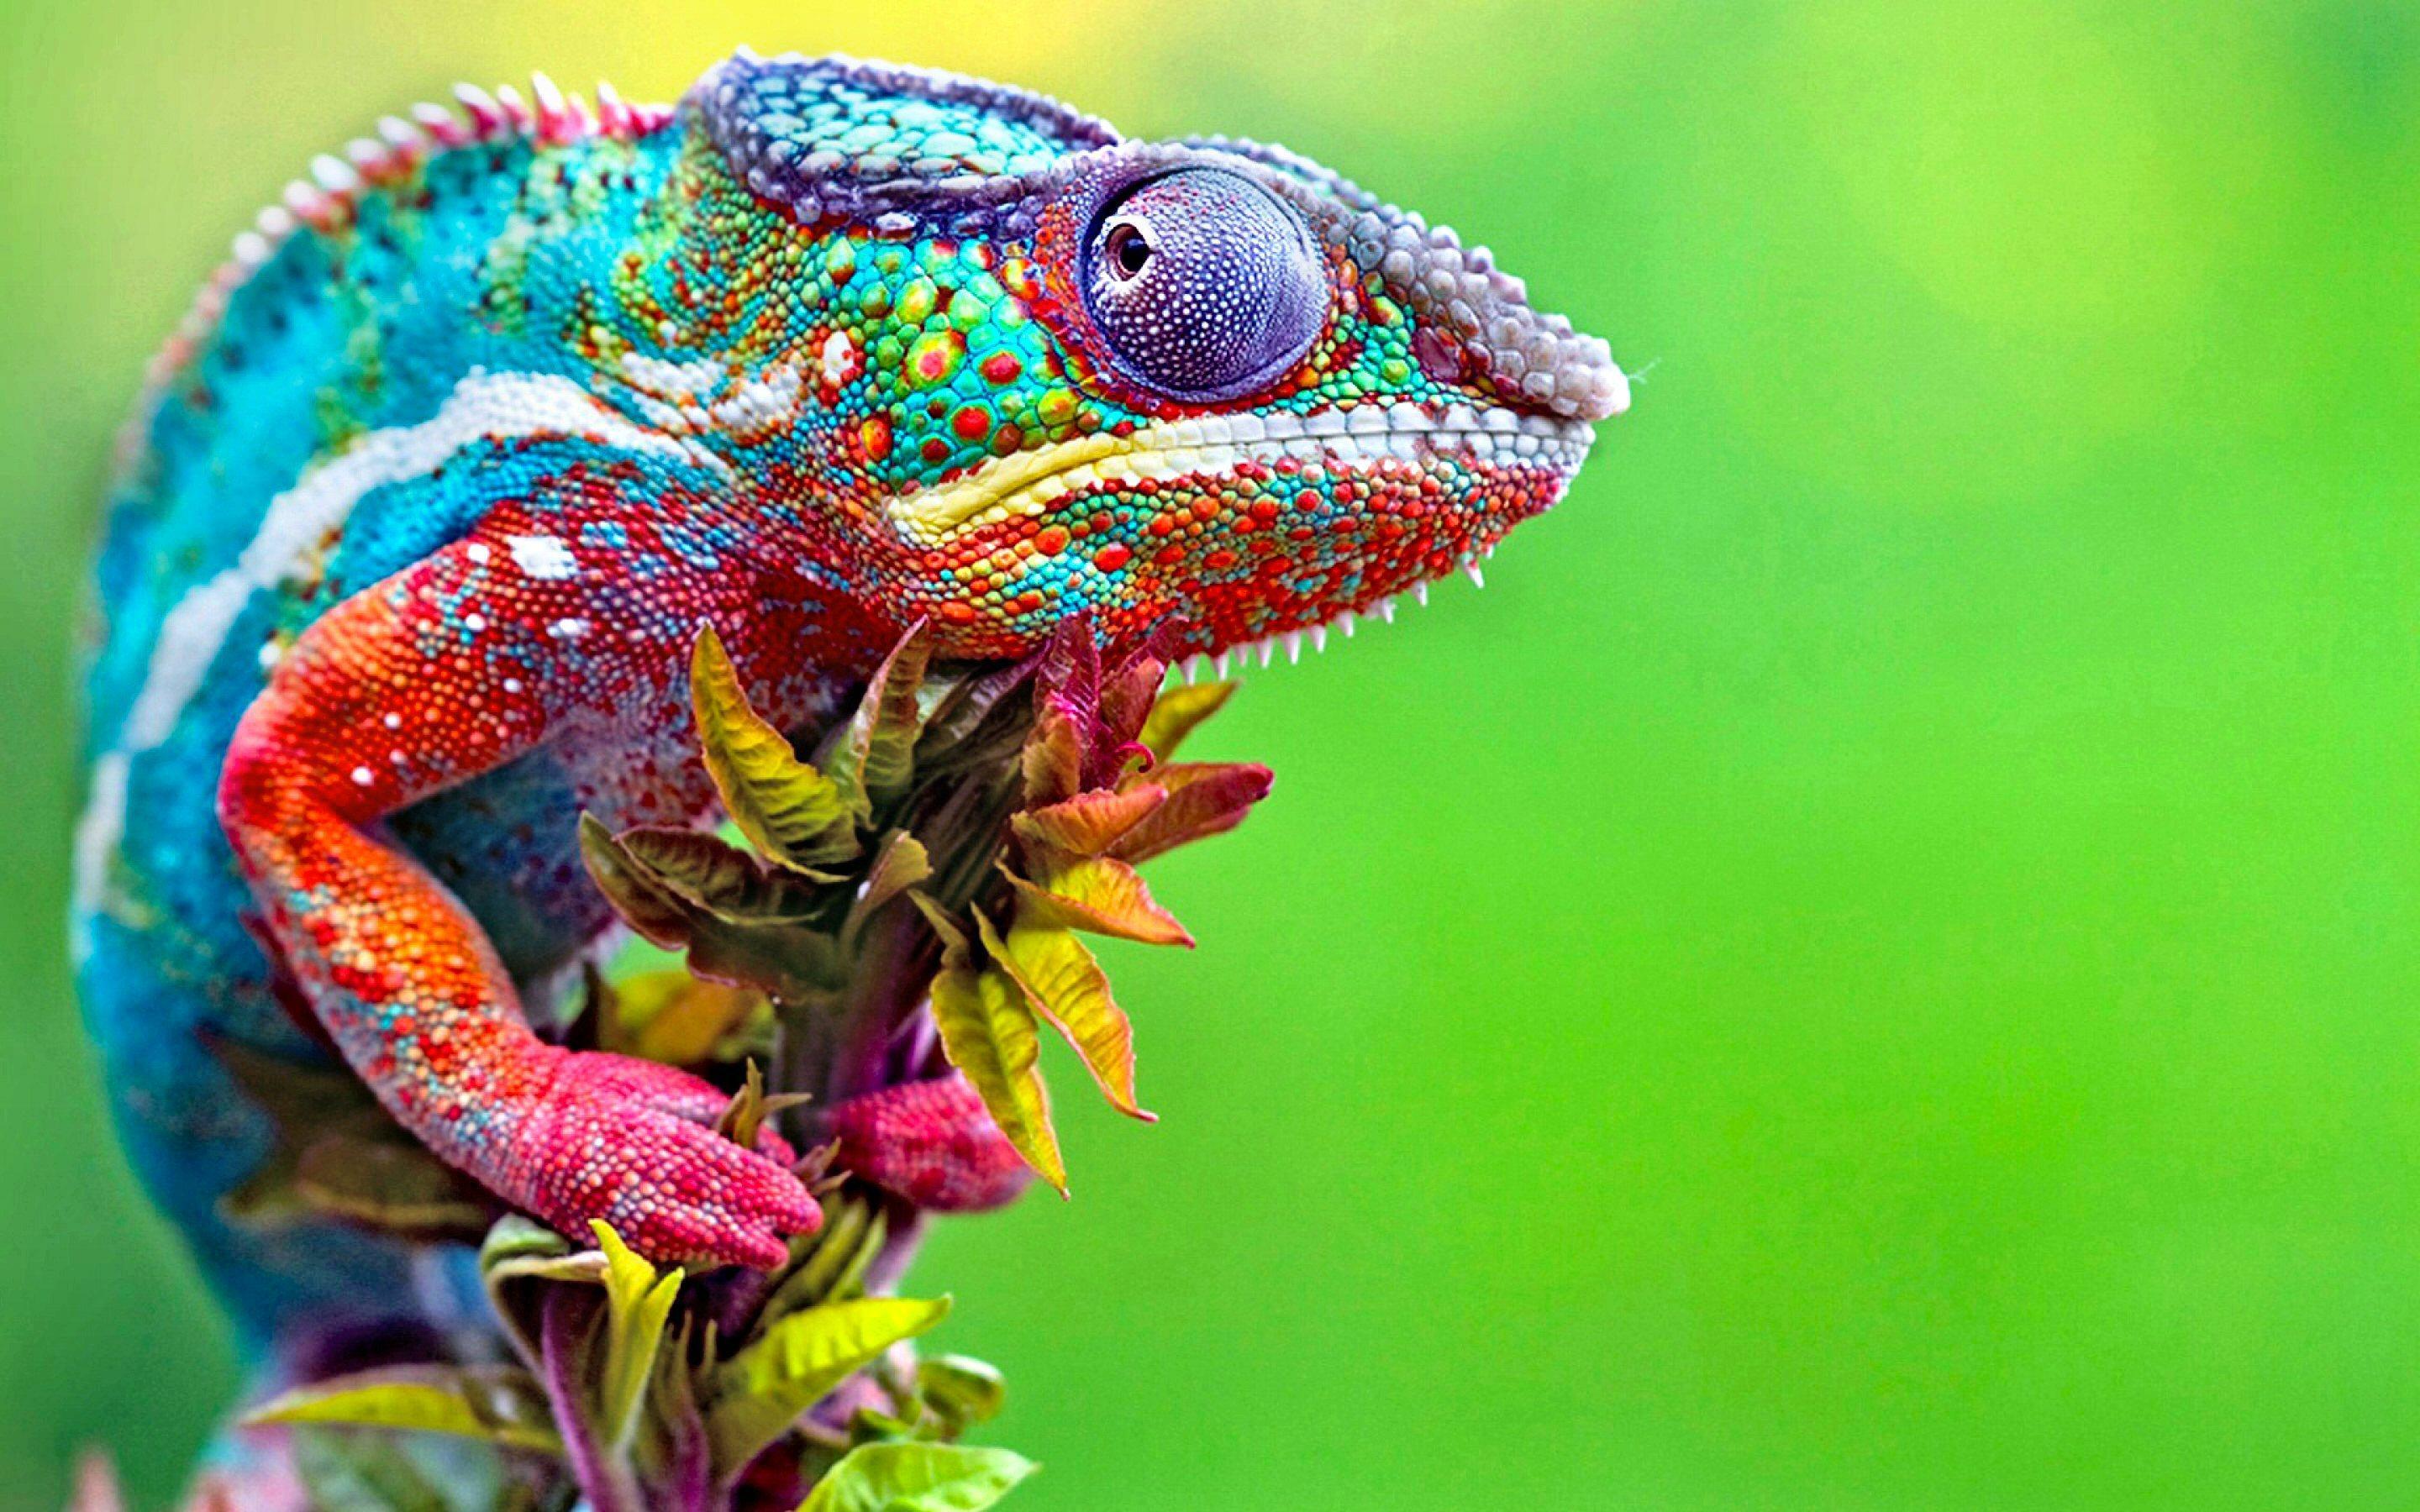 Chameleon for Windows 8 is a simple desktop customization application that will allow you to pick or automatically change your lock screen background.